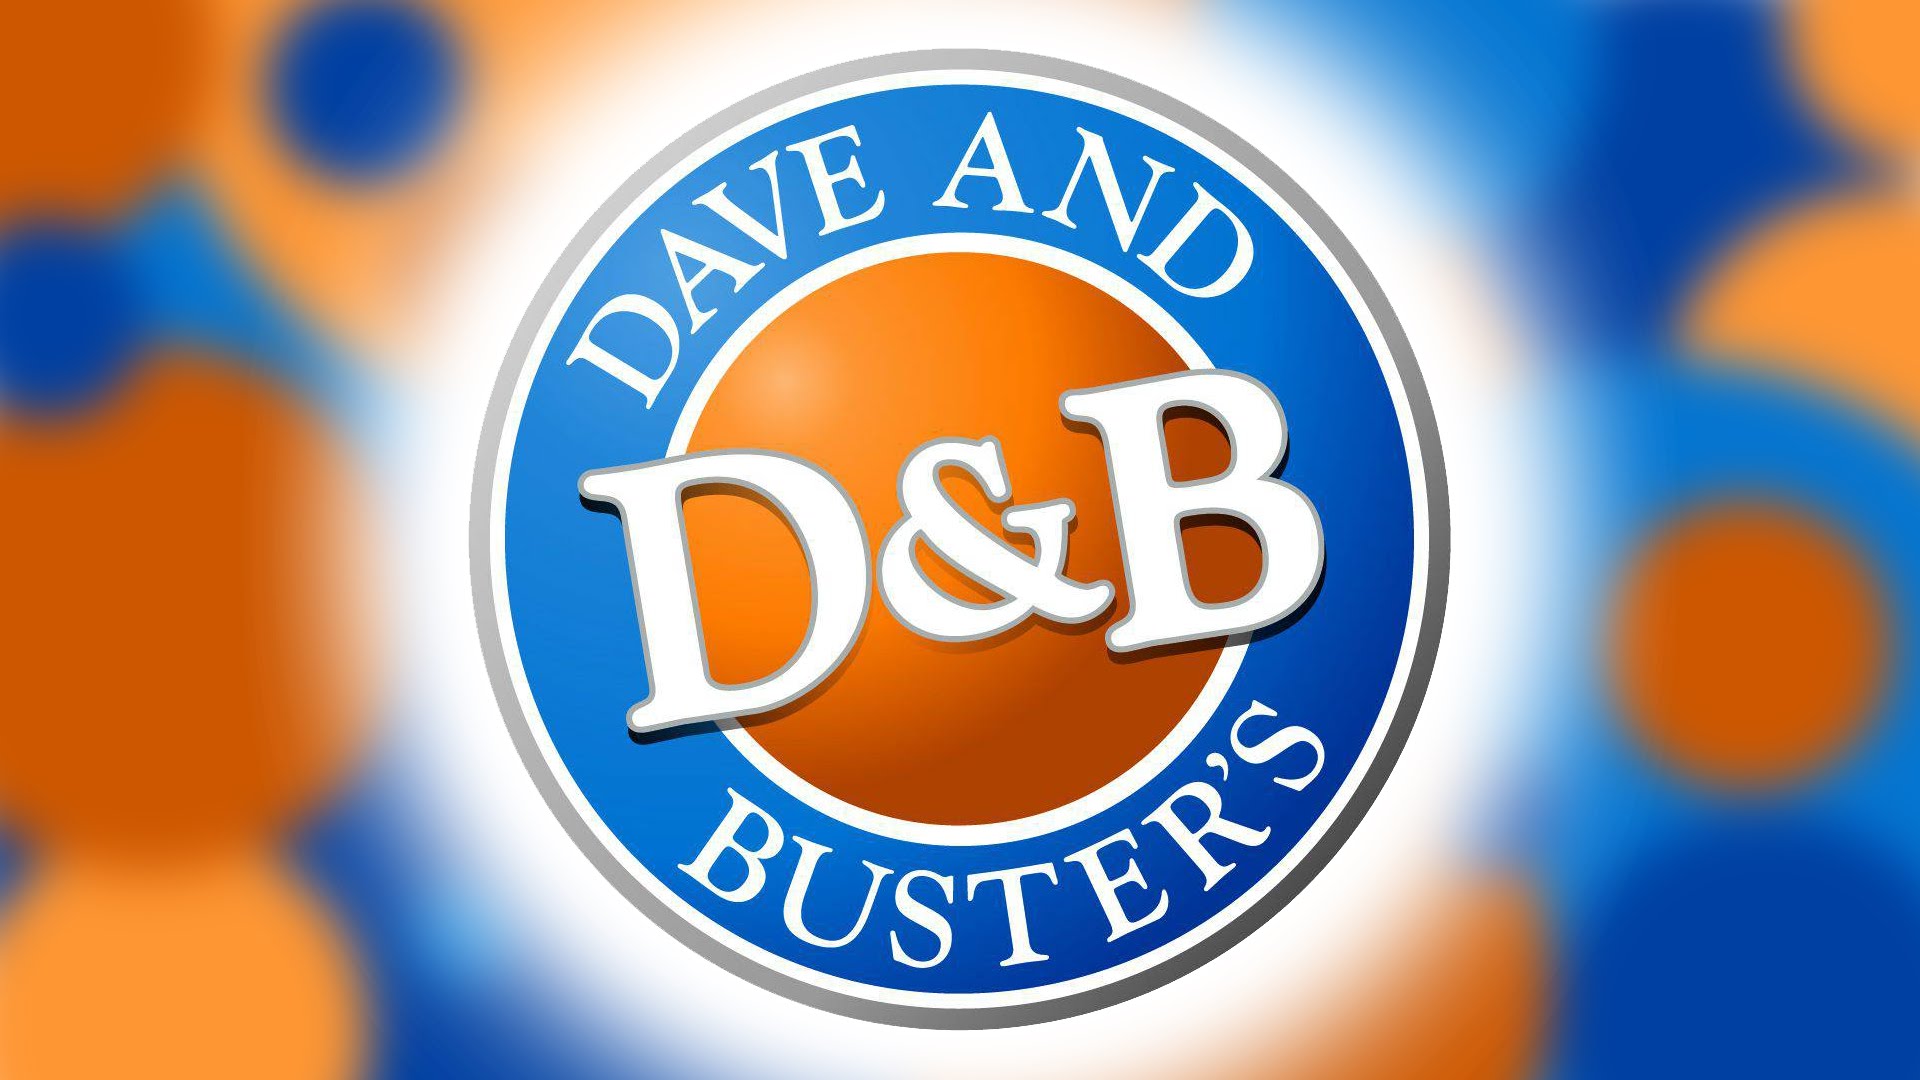 Dave and busters overland park Telegraph